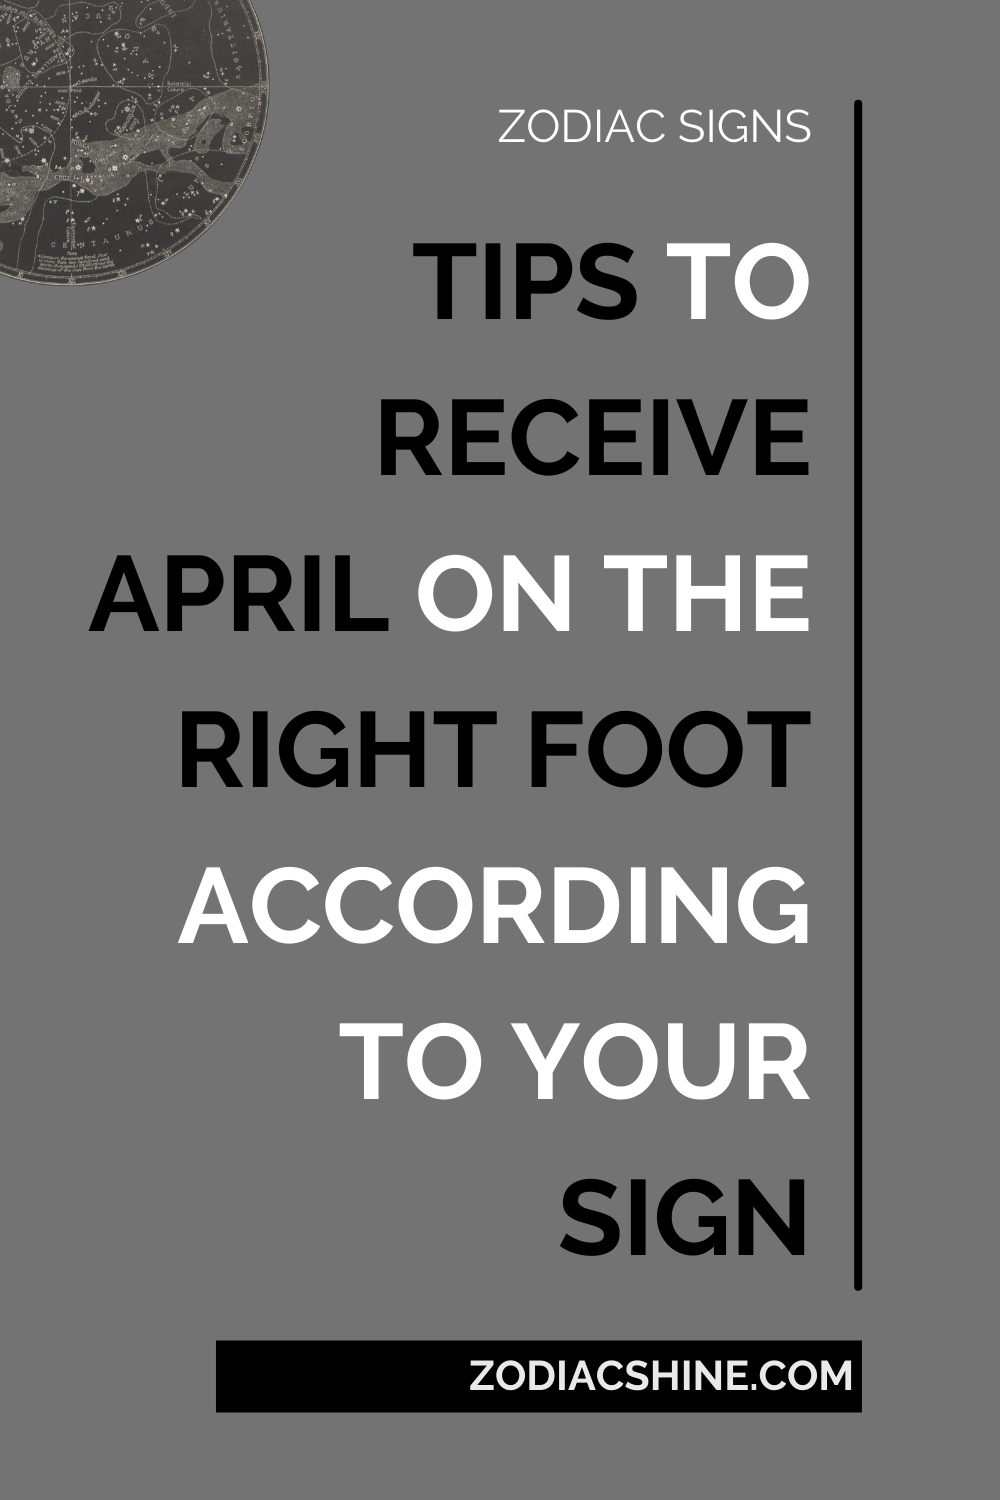 Tips To Receive April On The Right Foot According To Your Sign